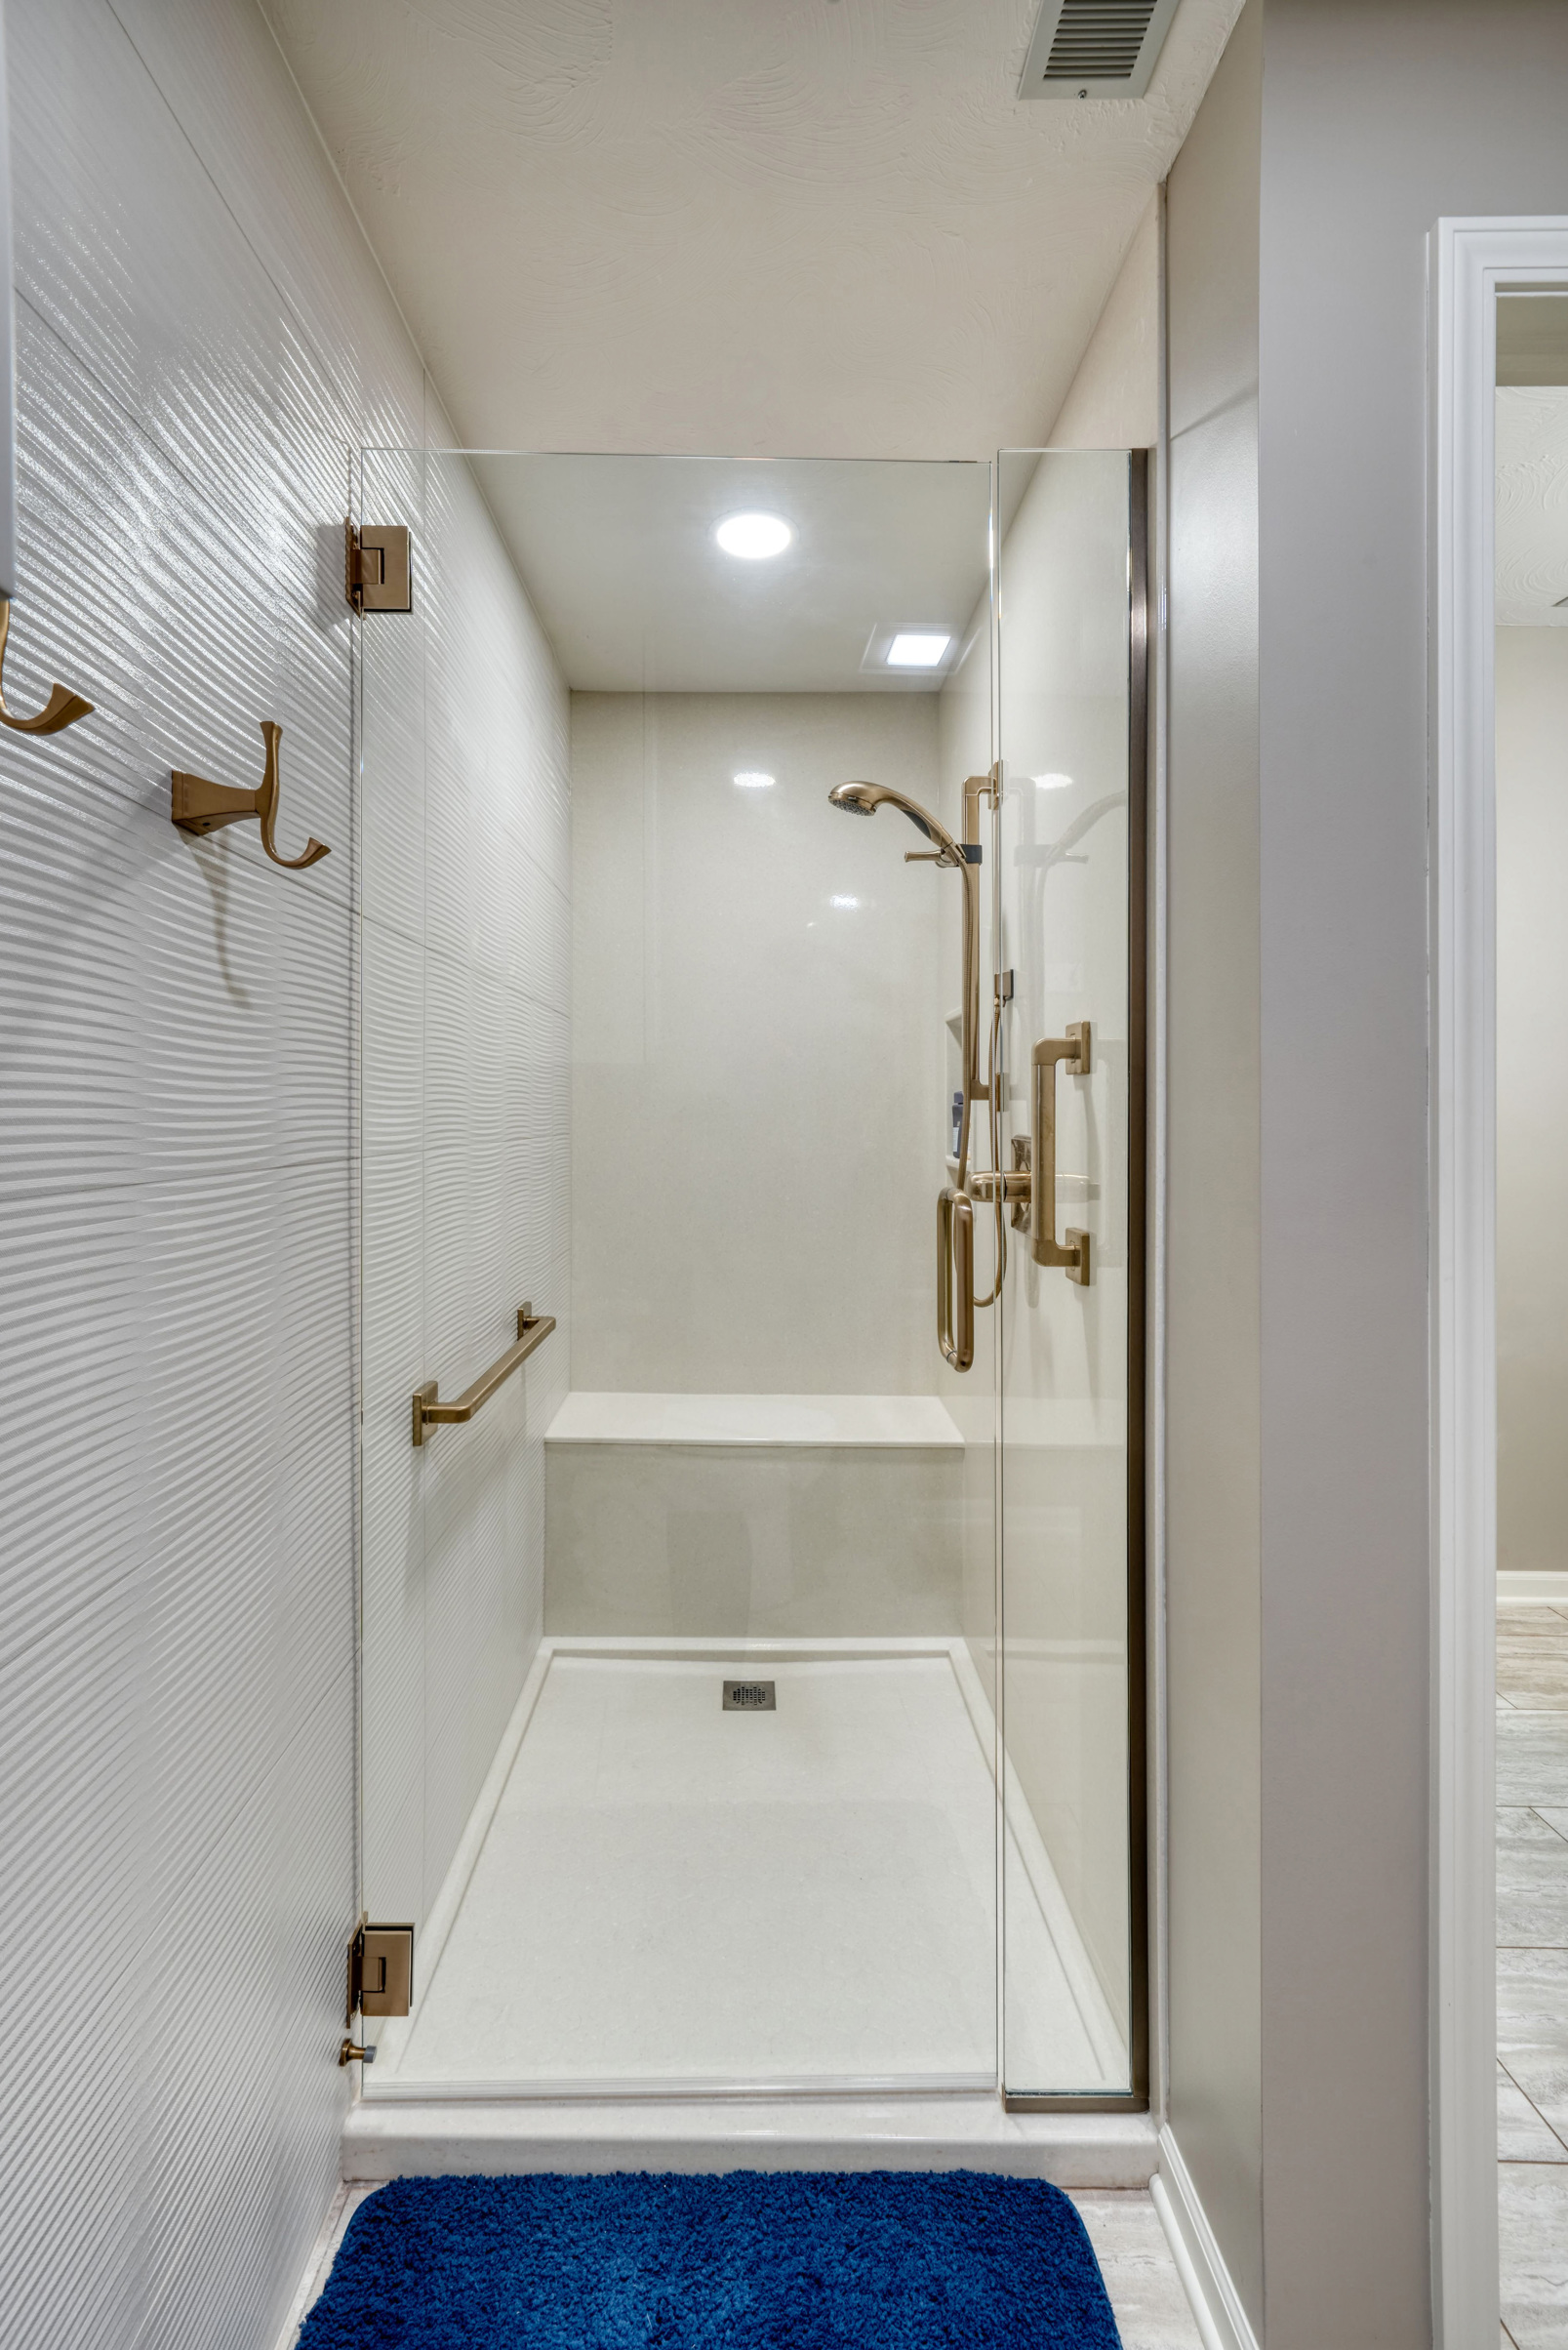 Walk in shower with horizontal tiles and brass hardware